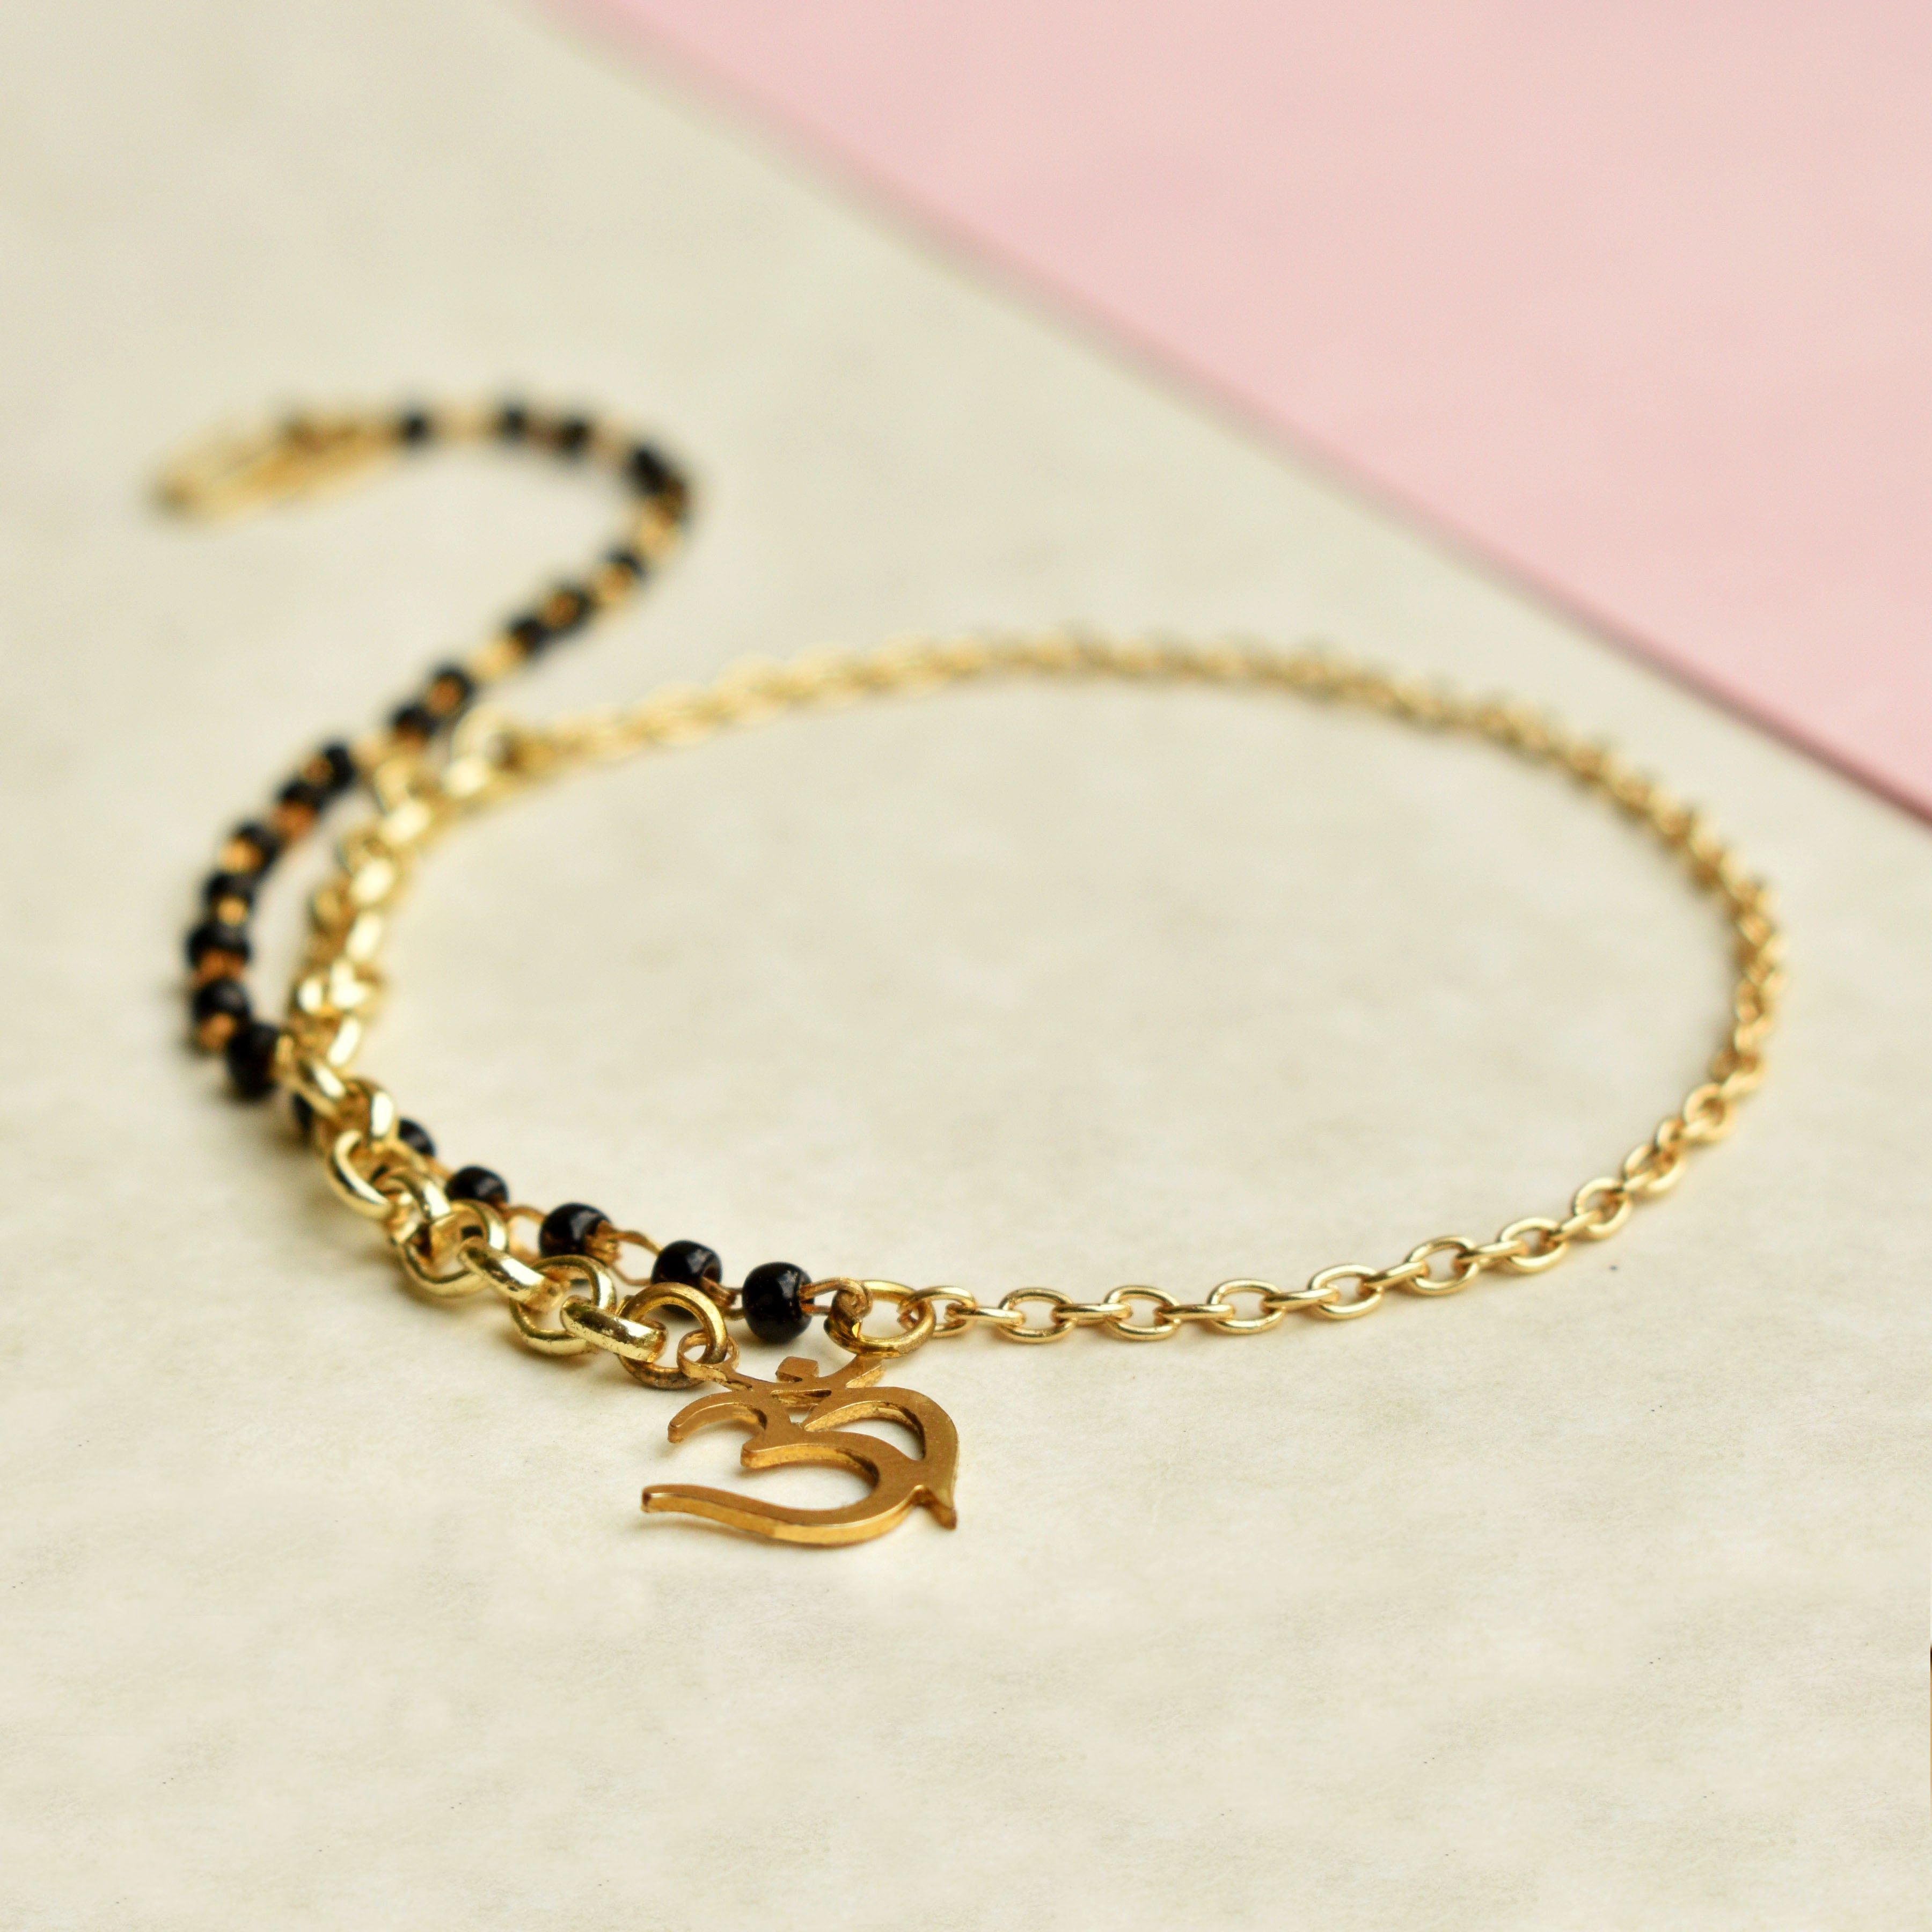 LOVELY Stone Mangalsutra Bracelet Gold Plated With Chain Gold AD Diamond Hand  Mangalsutra Bracelet, Diamond Mangalsutra Valentine Gift - Etsy